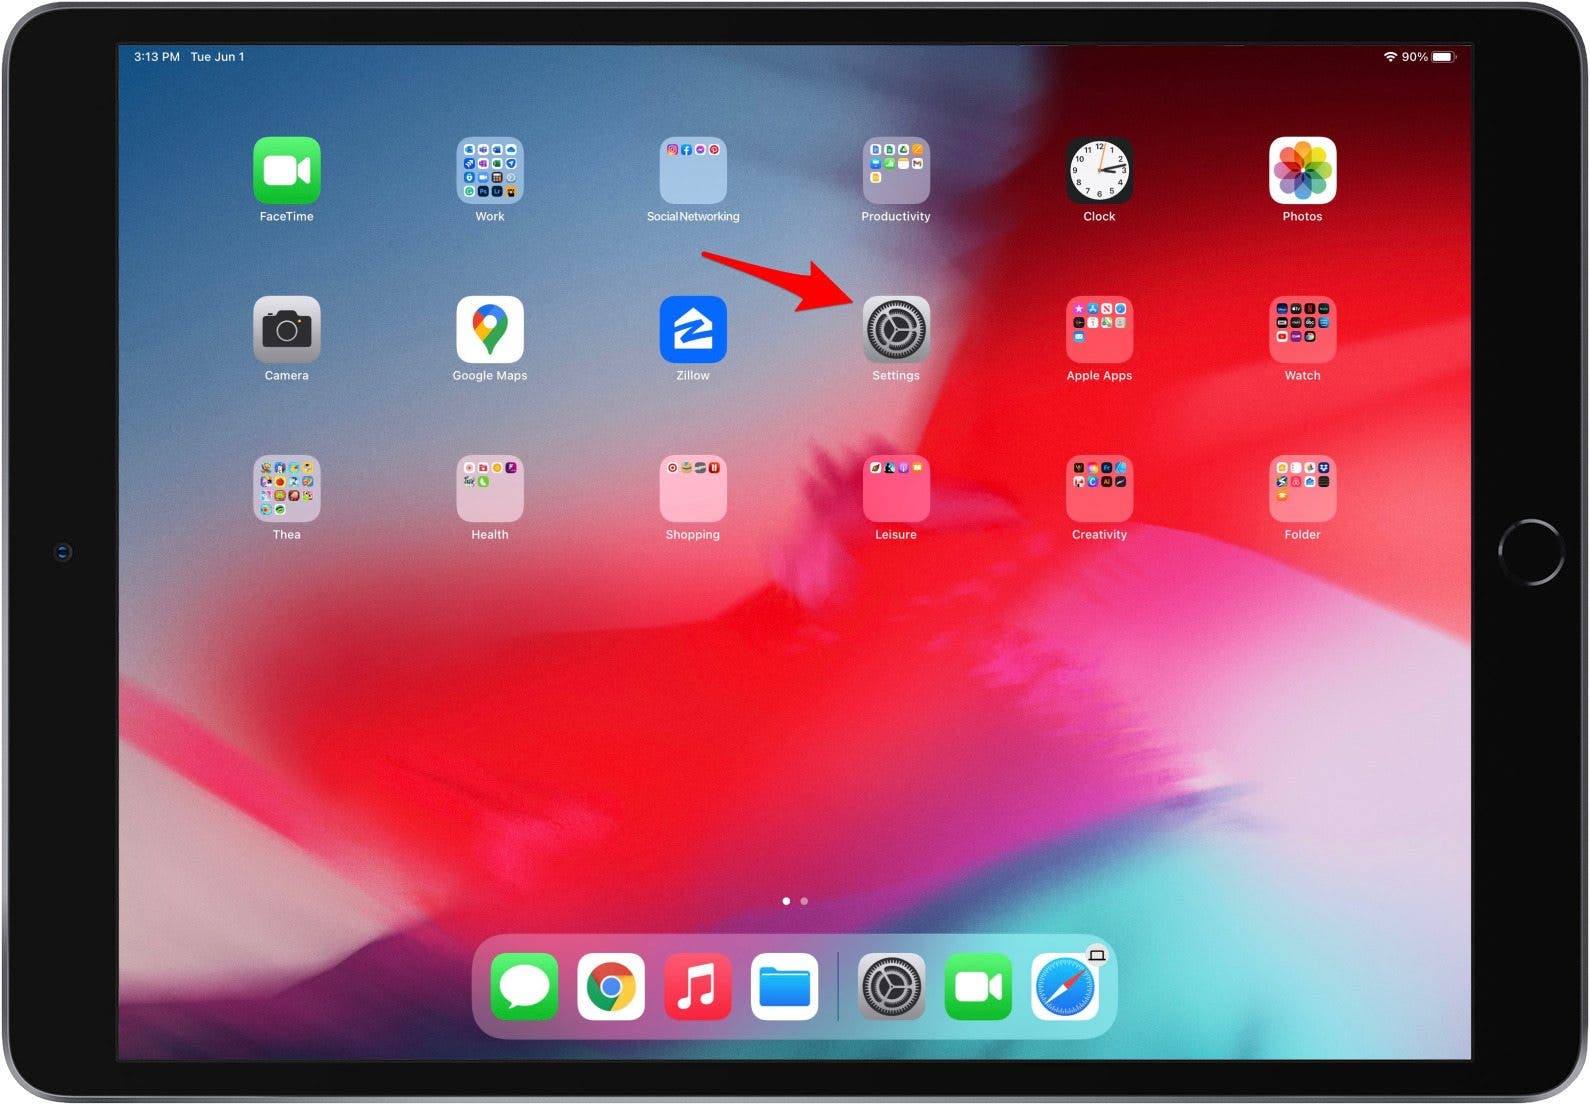 Open the Settings app to back up iPad to iCloud